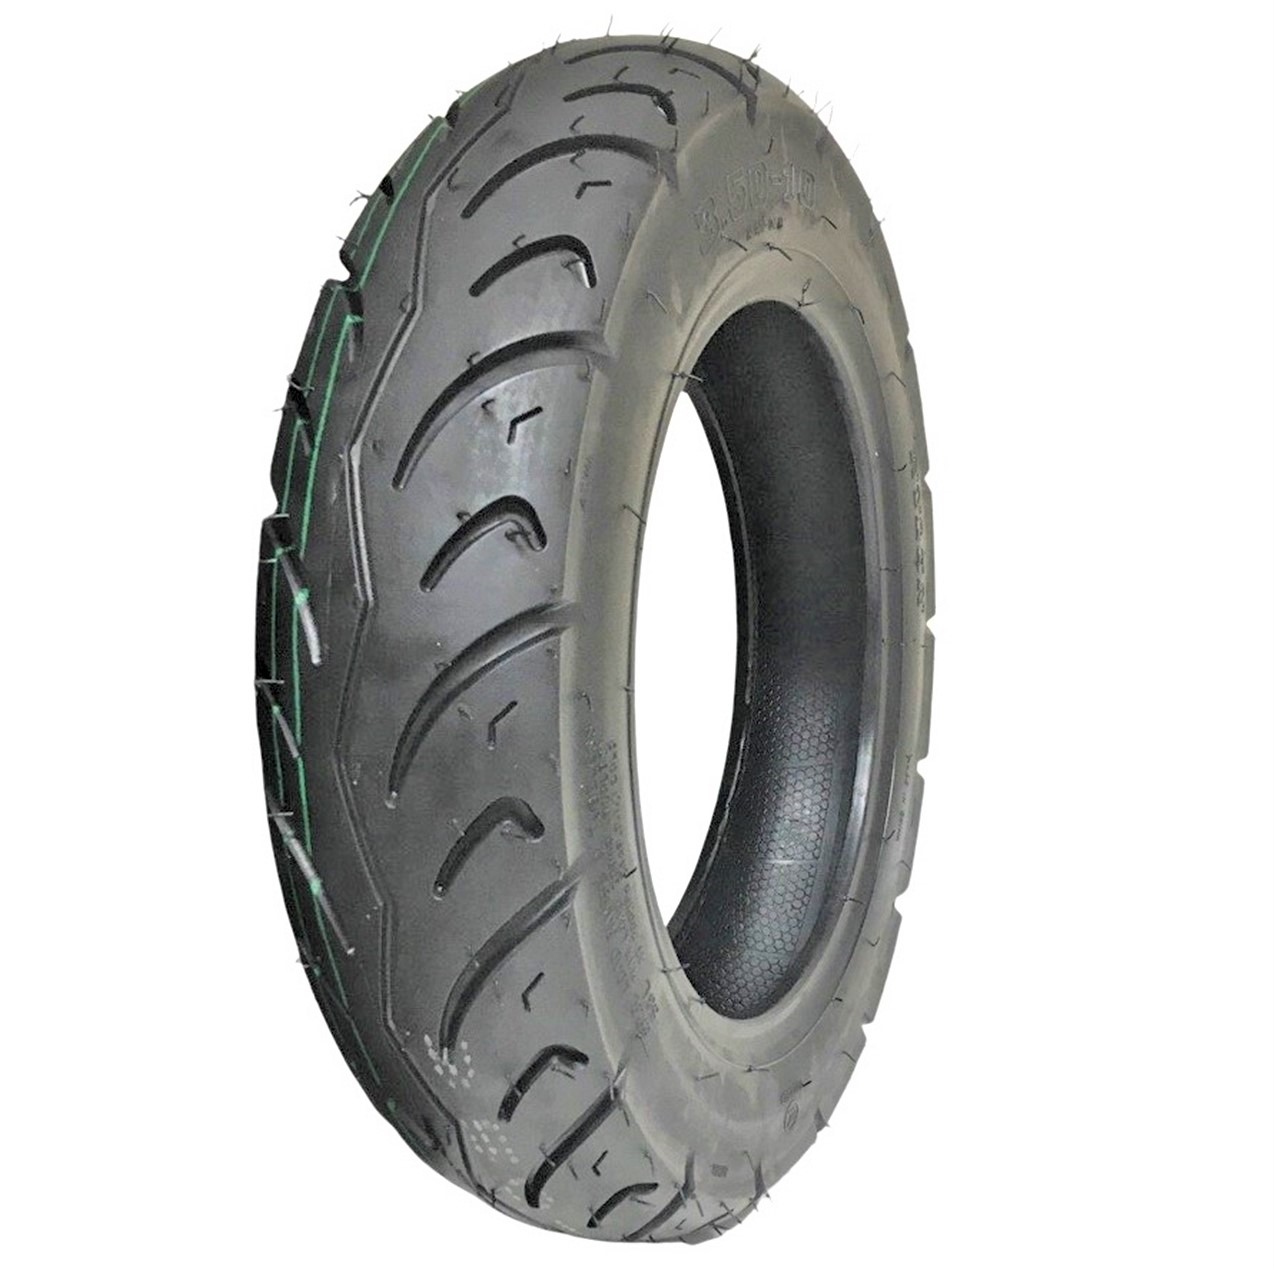 TIRE (10") 3.50x10 TL Scooter Tire